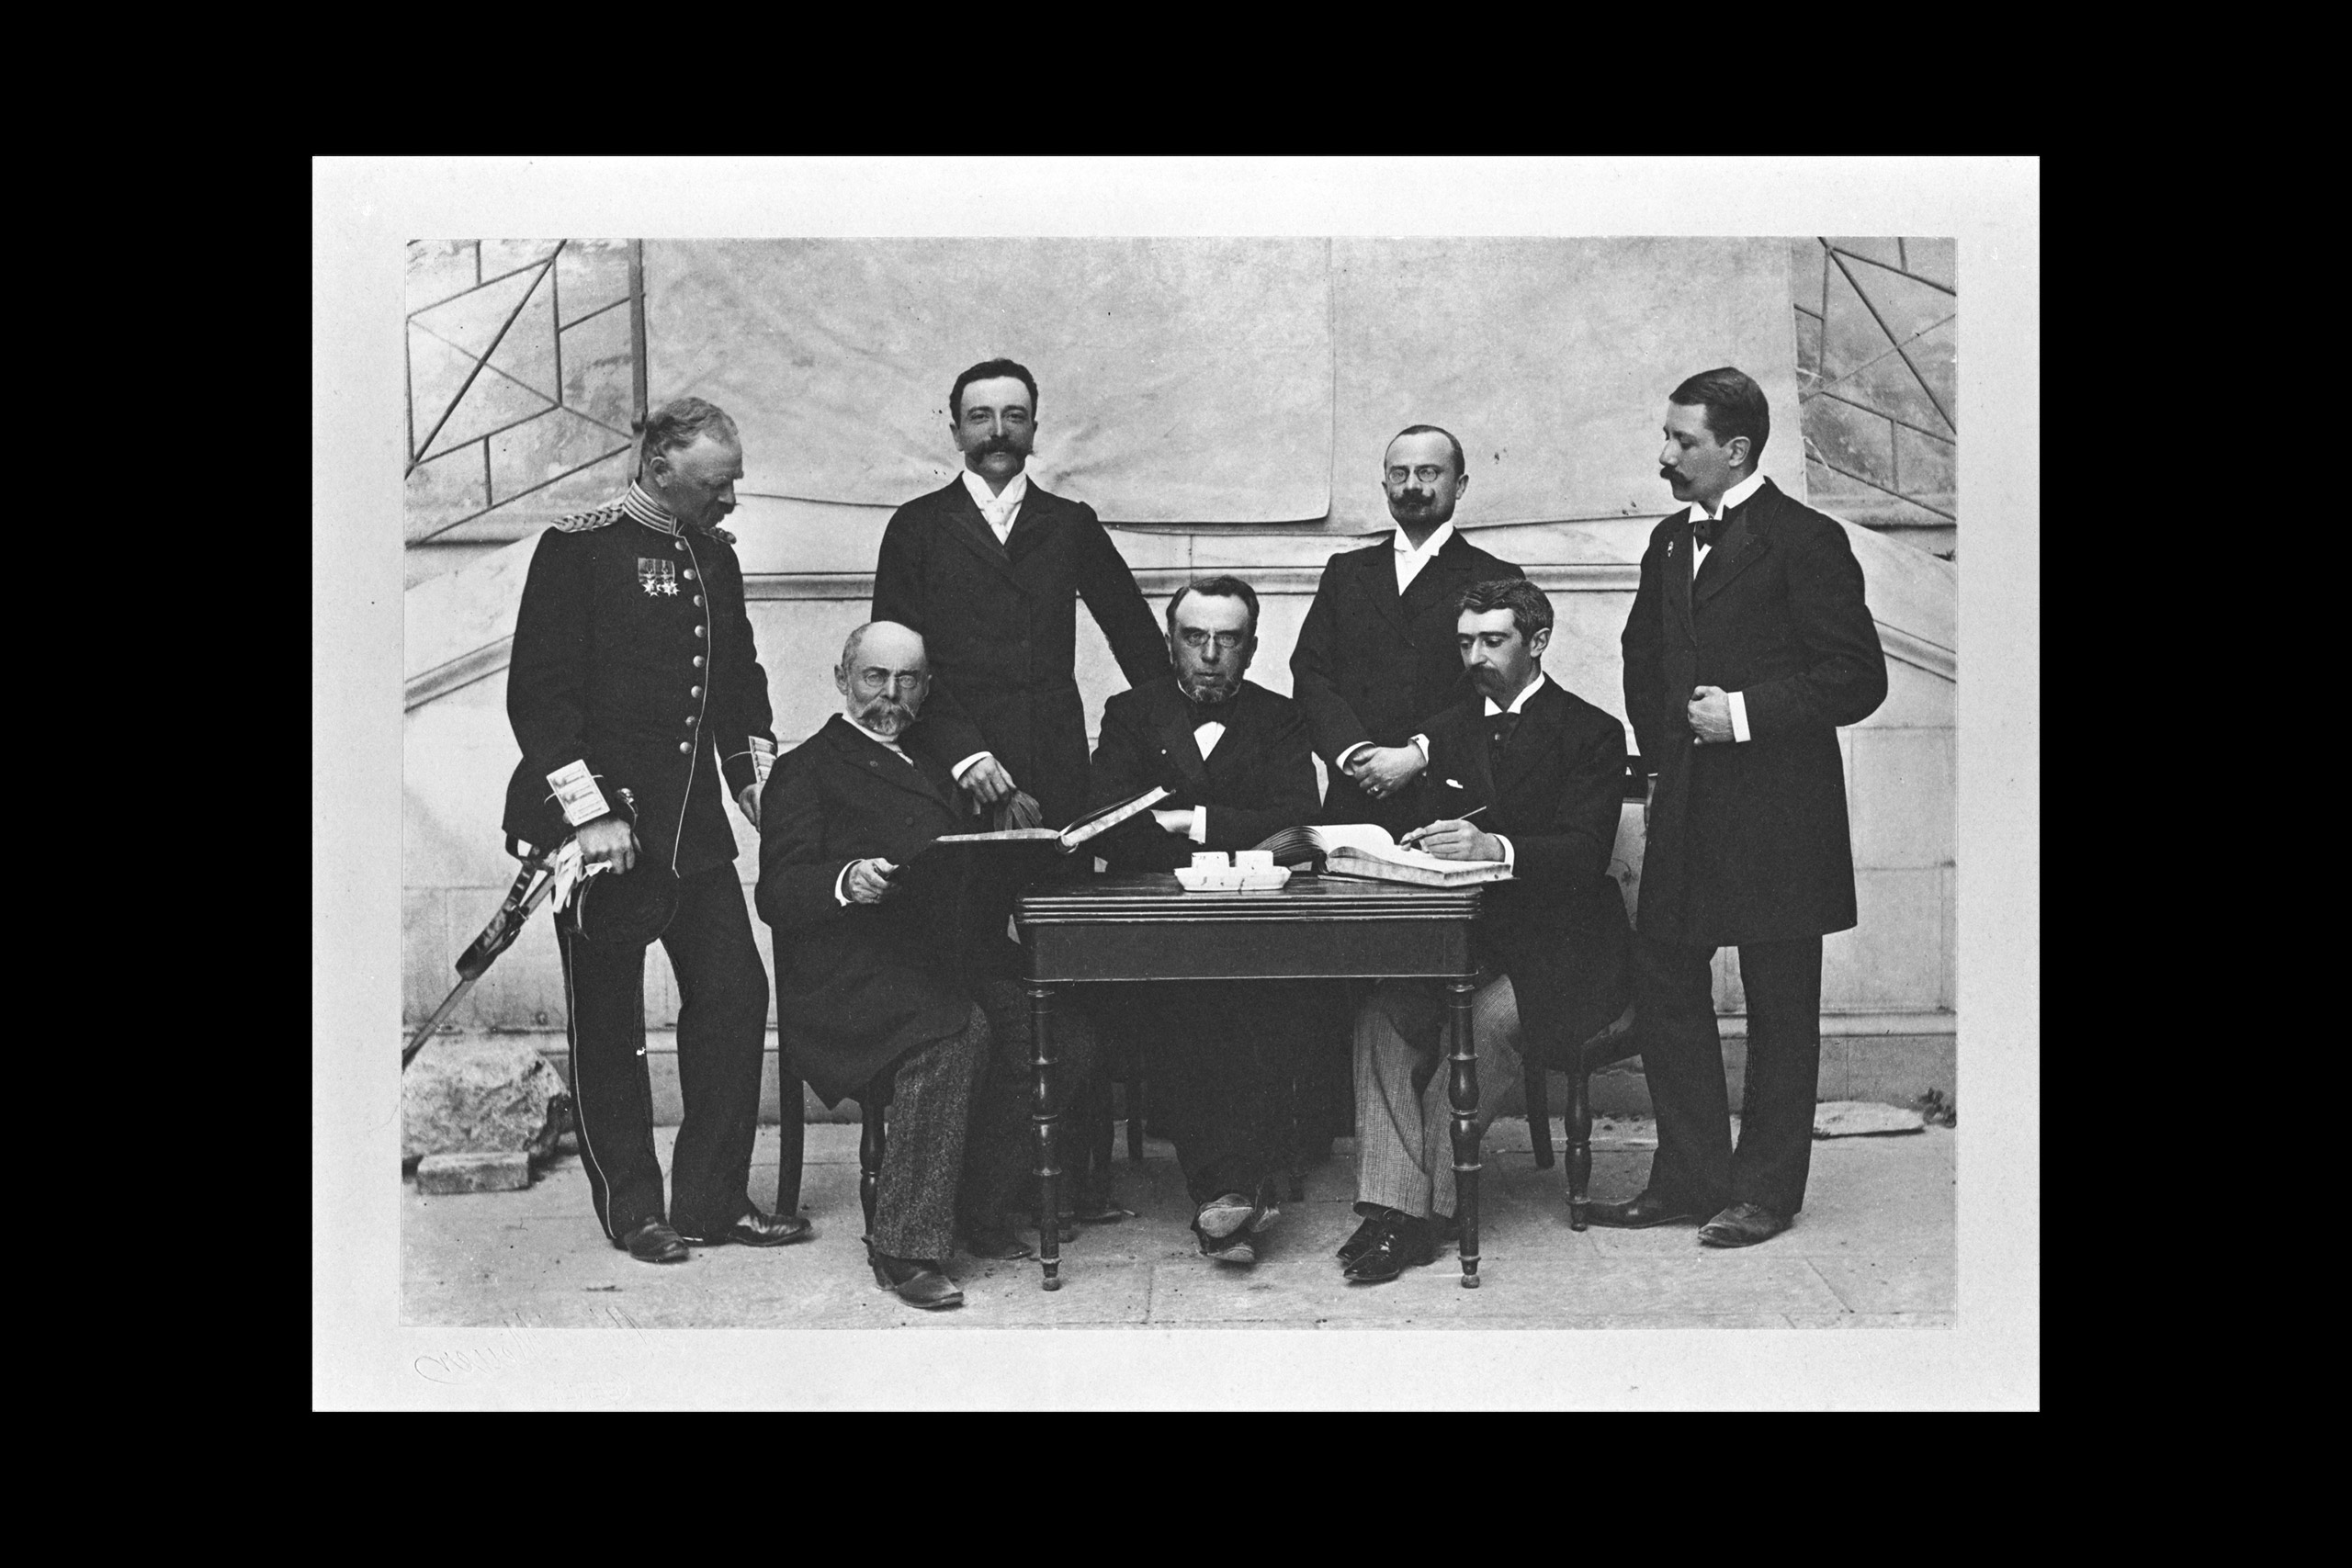 International Olympic Committee (IOC) members in Athens during the 1896 games.